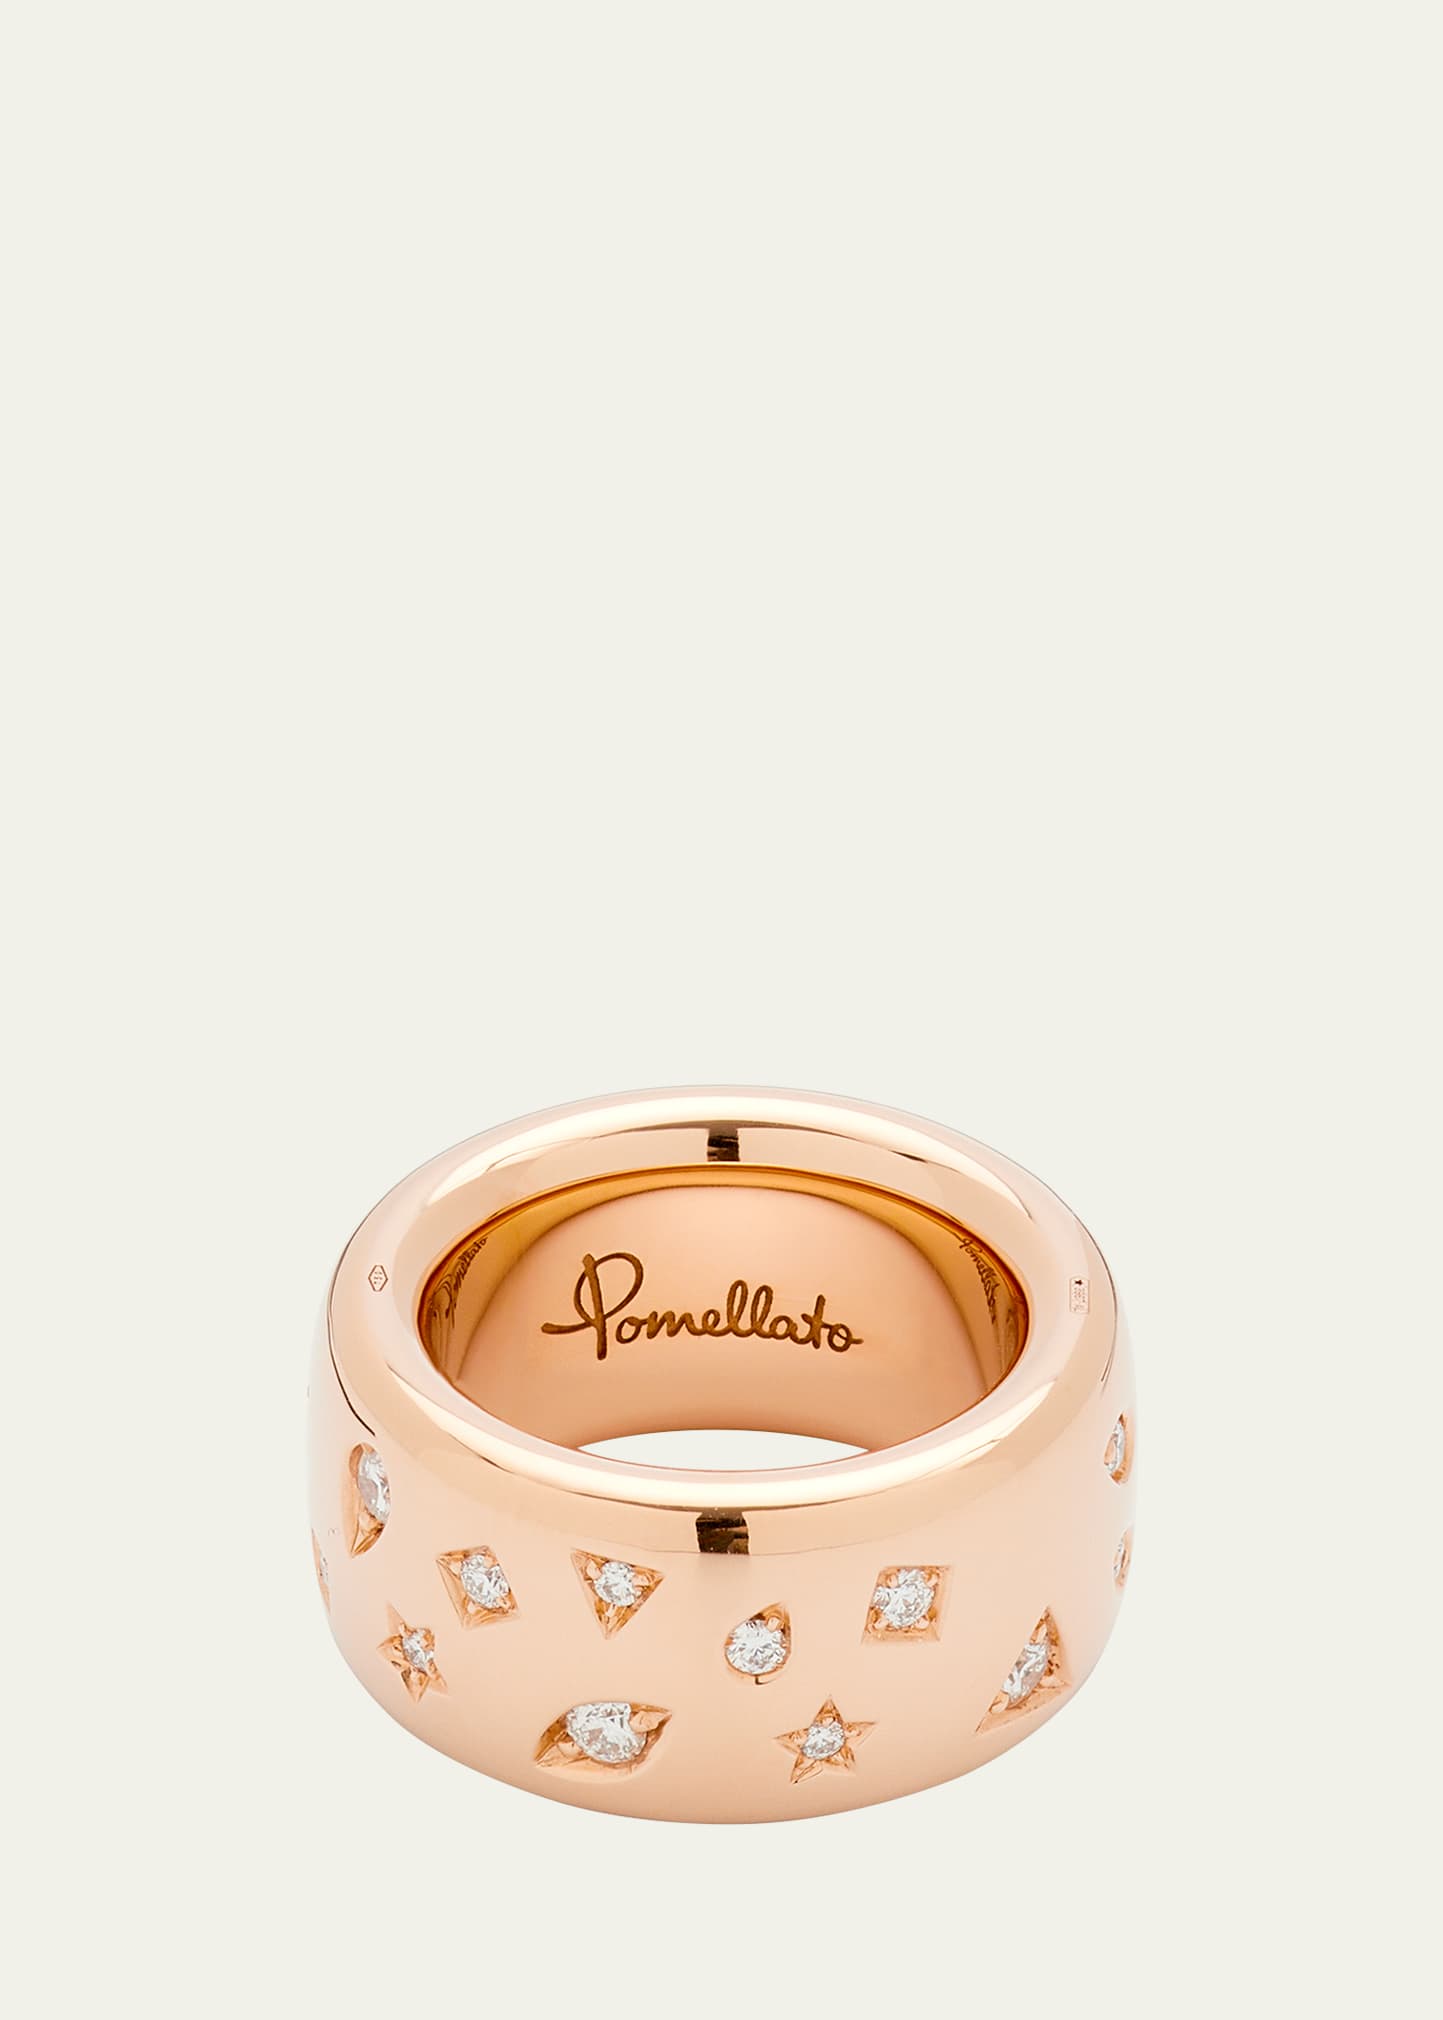 POMELLATO ICONICA LARGE 18K ROSE RING WITH DIAMONDS